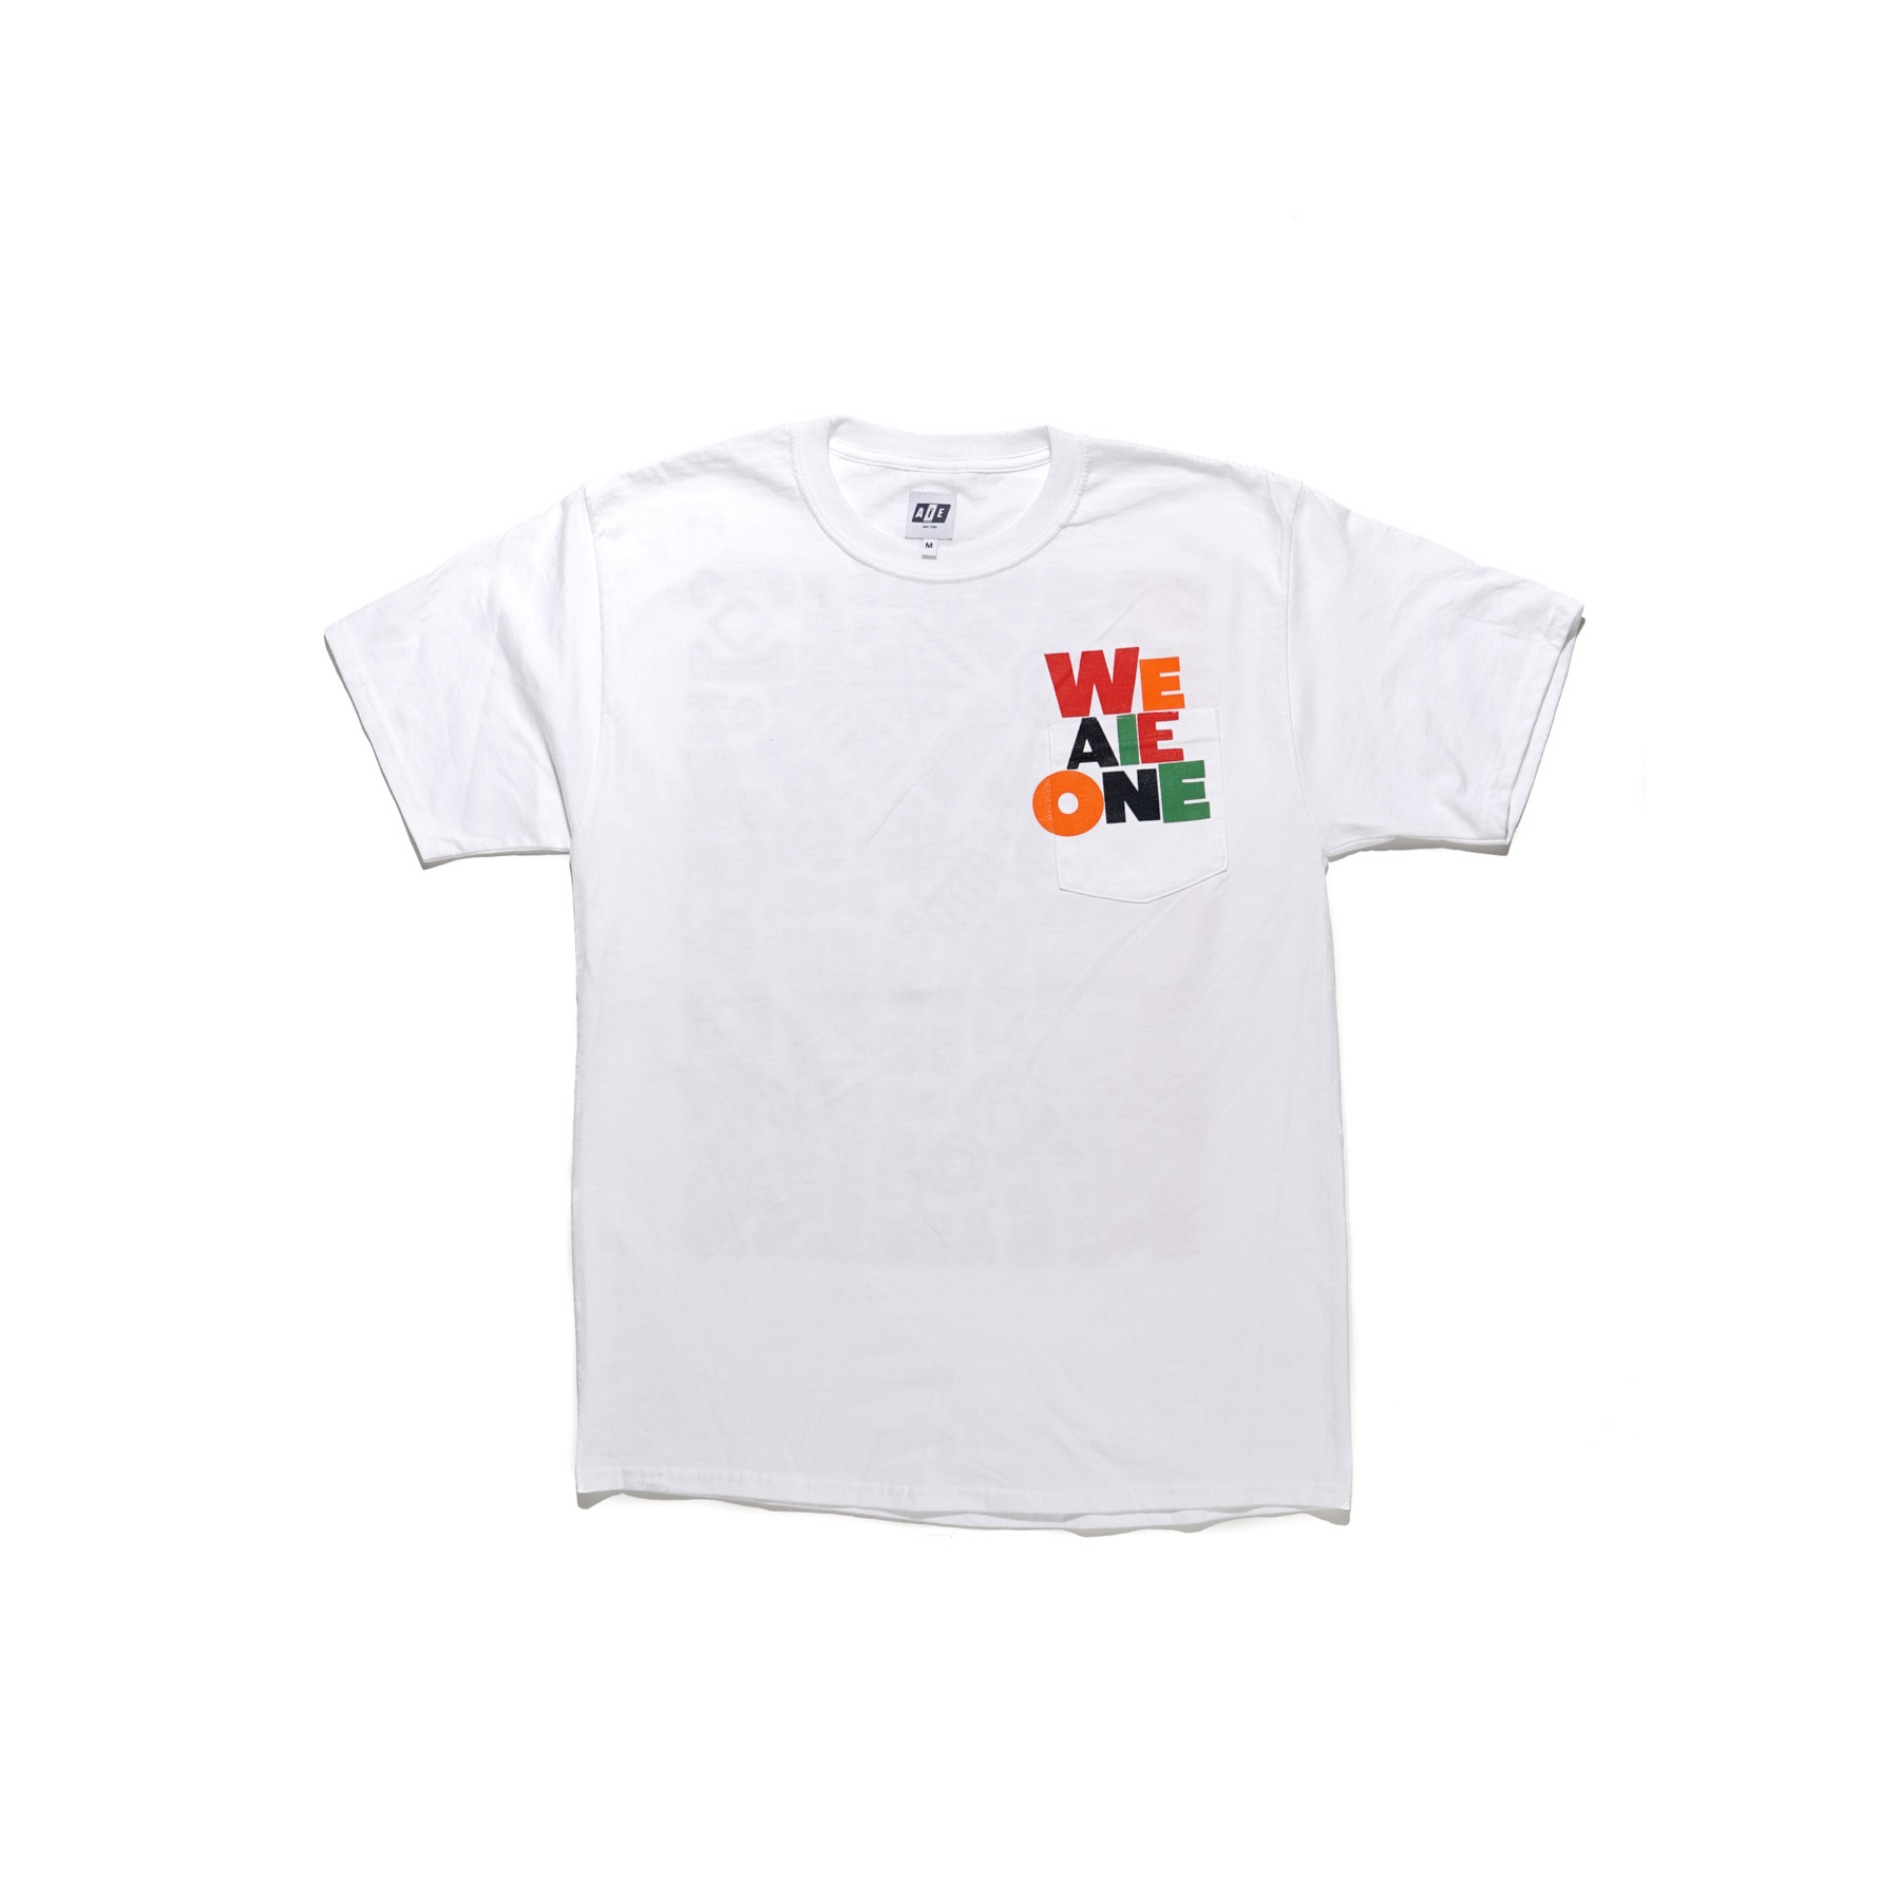 SS22 AIE / PRINTED WE AIE ONE S/S POCKET TEE WHITE